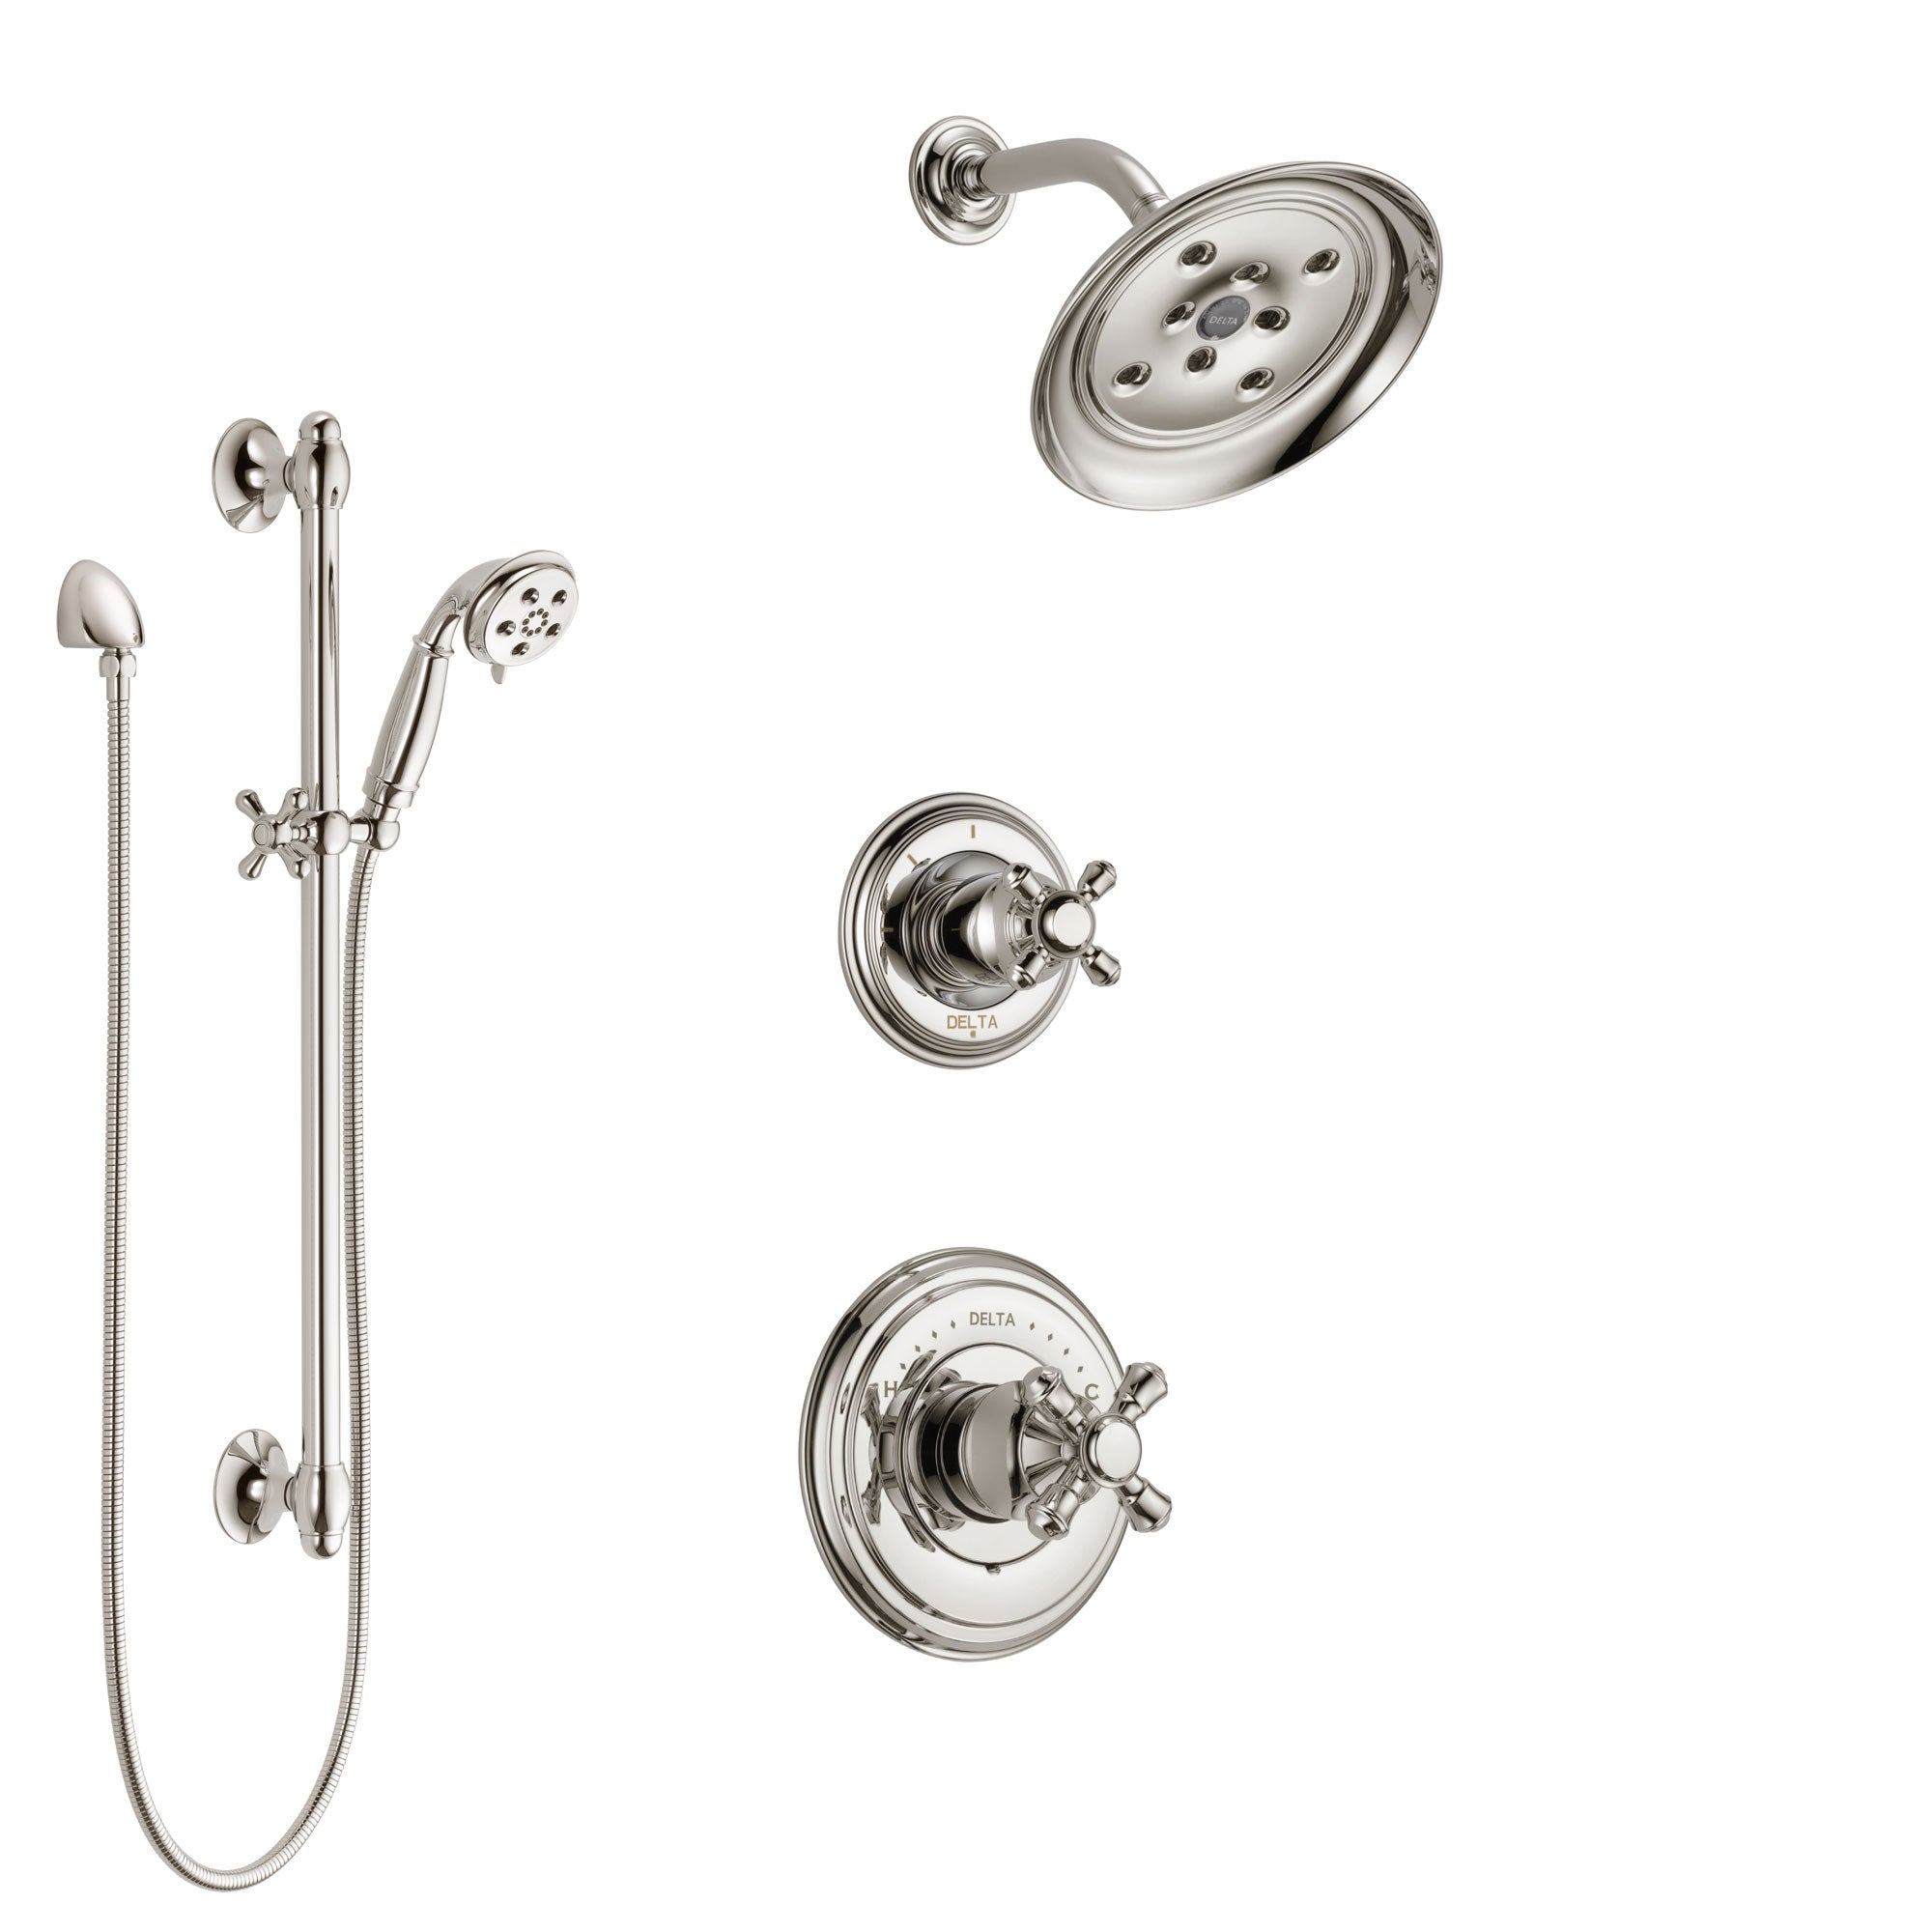 Delta Cassidy Polished Nickel Finish Shower System with Control Handle, 3-Setting Diverter, Showerhead, and Hand Shower with Slidebar SS14971PN5